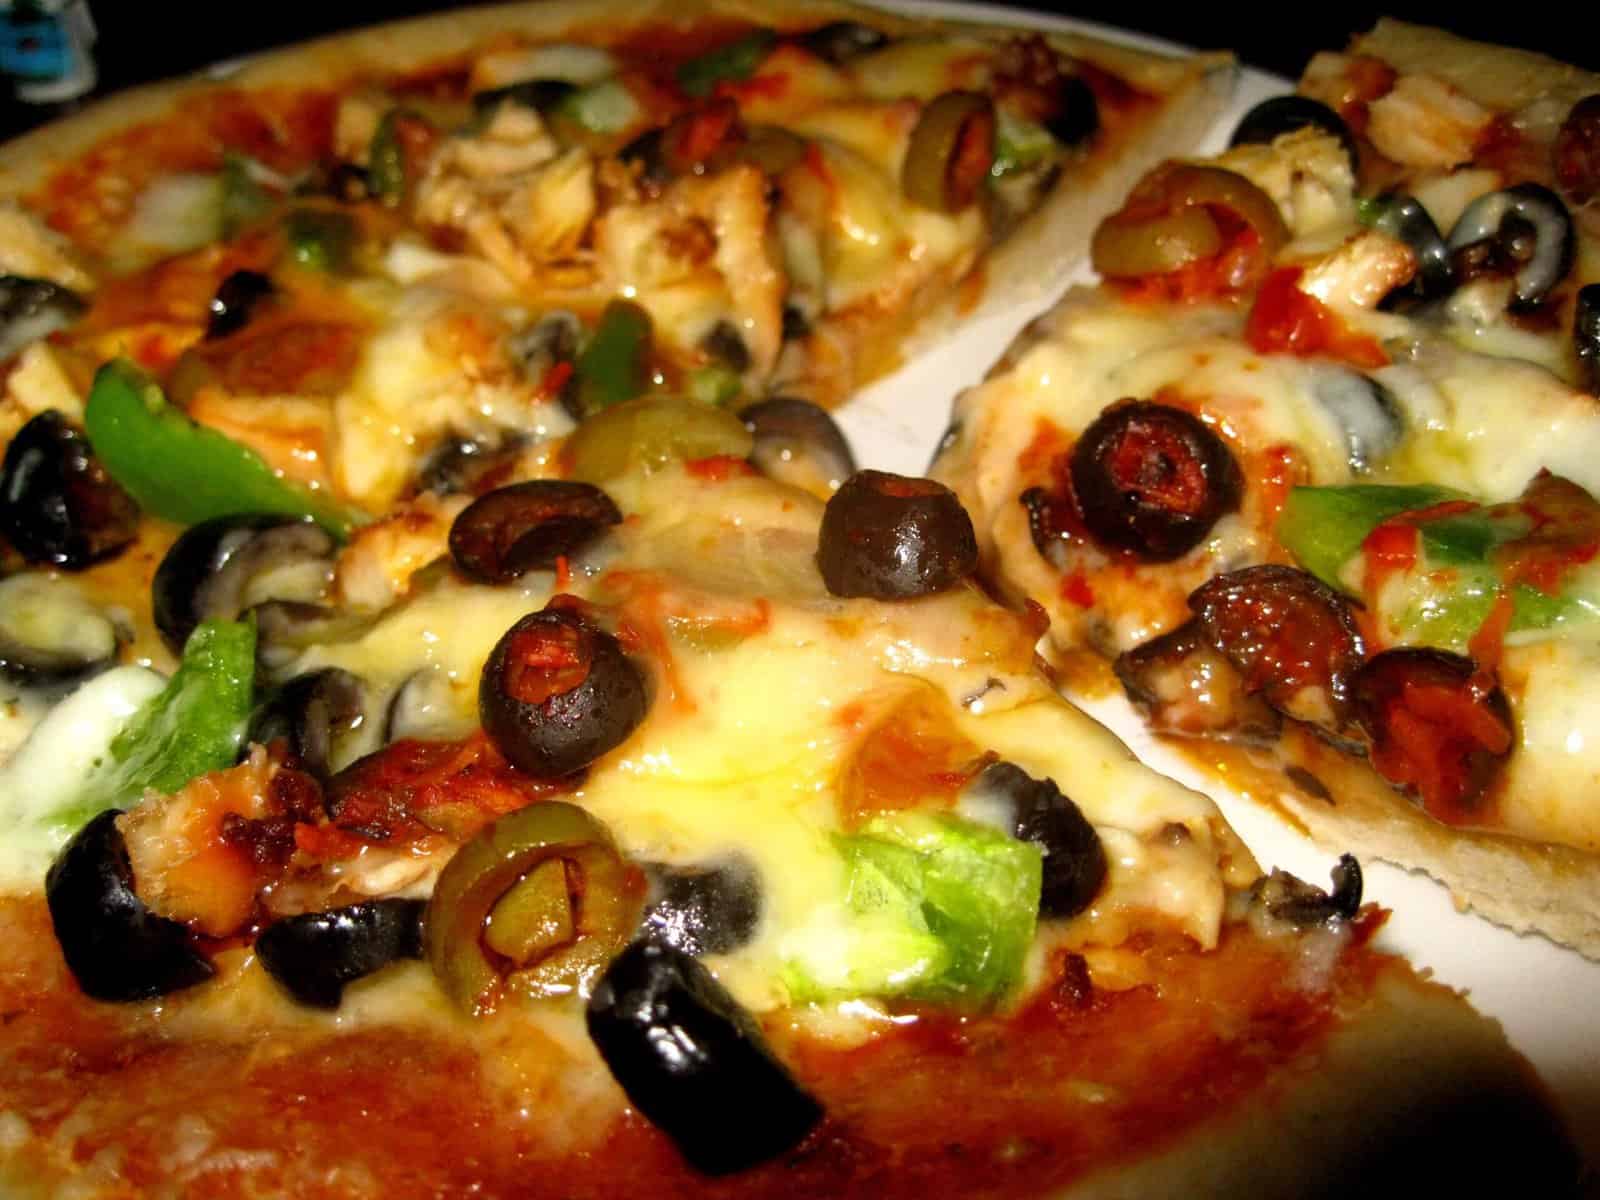  A homemade pizza sauce is the key to a delicious pizza.